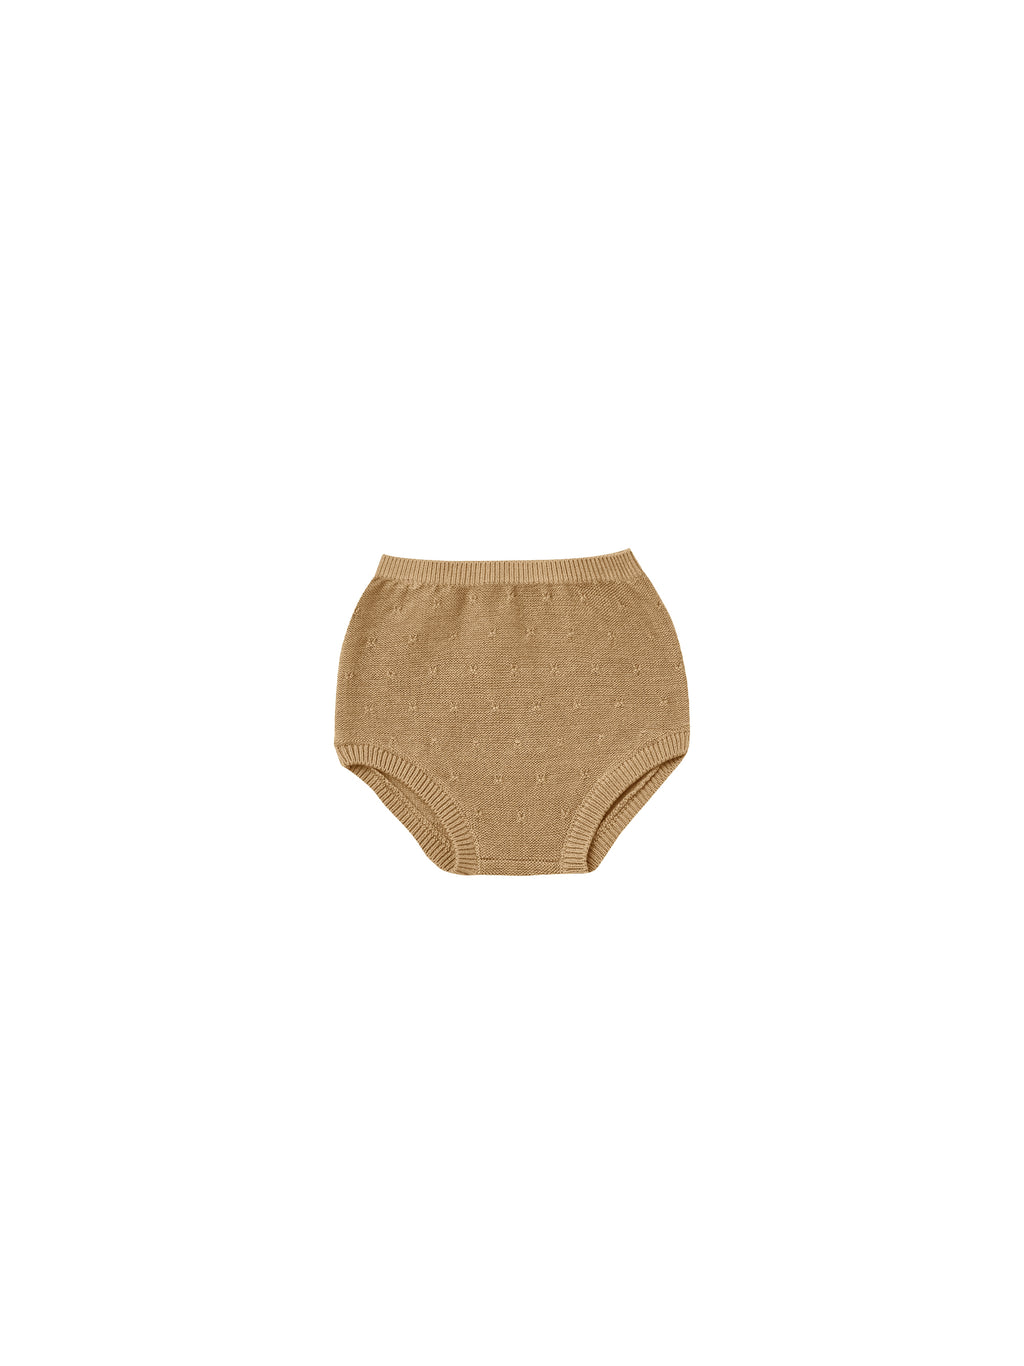 Quincy Mae Knit Bloomer - Honey